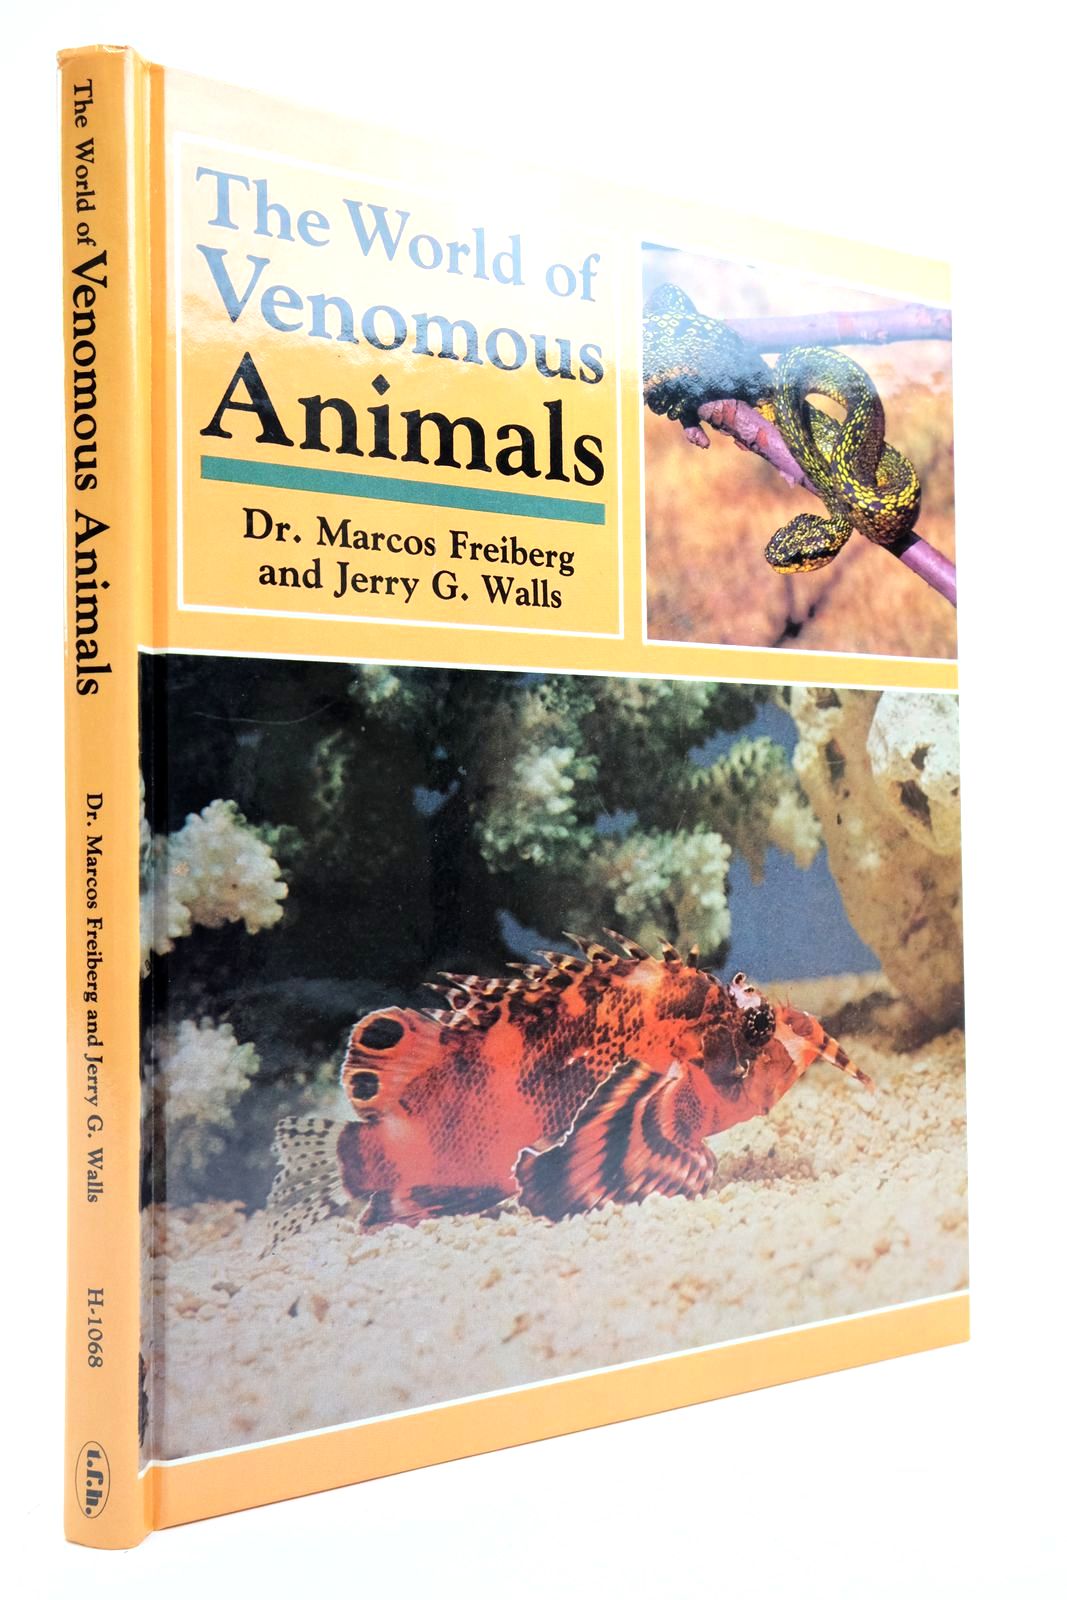 Photo of THE WORLD OF VENOMOUS ANIMALS written by Freiberg, Marcos Walls, Jerry G. published by T.F.H. Publications, Inc. Ltd. (STOCK CODE: 2139356)  for sale by Stella & Rose's Books